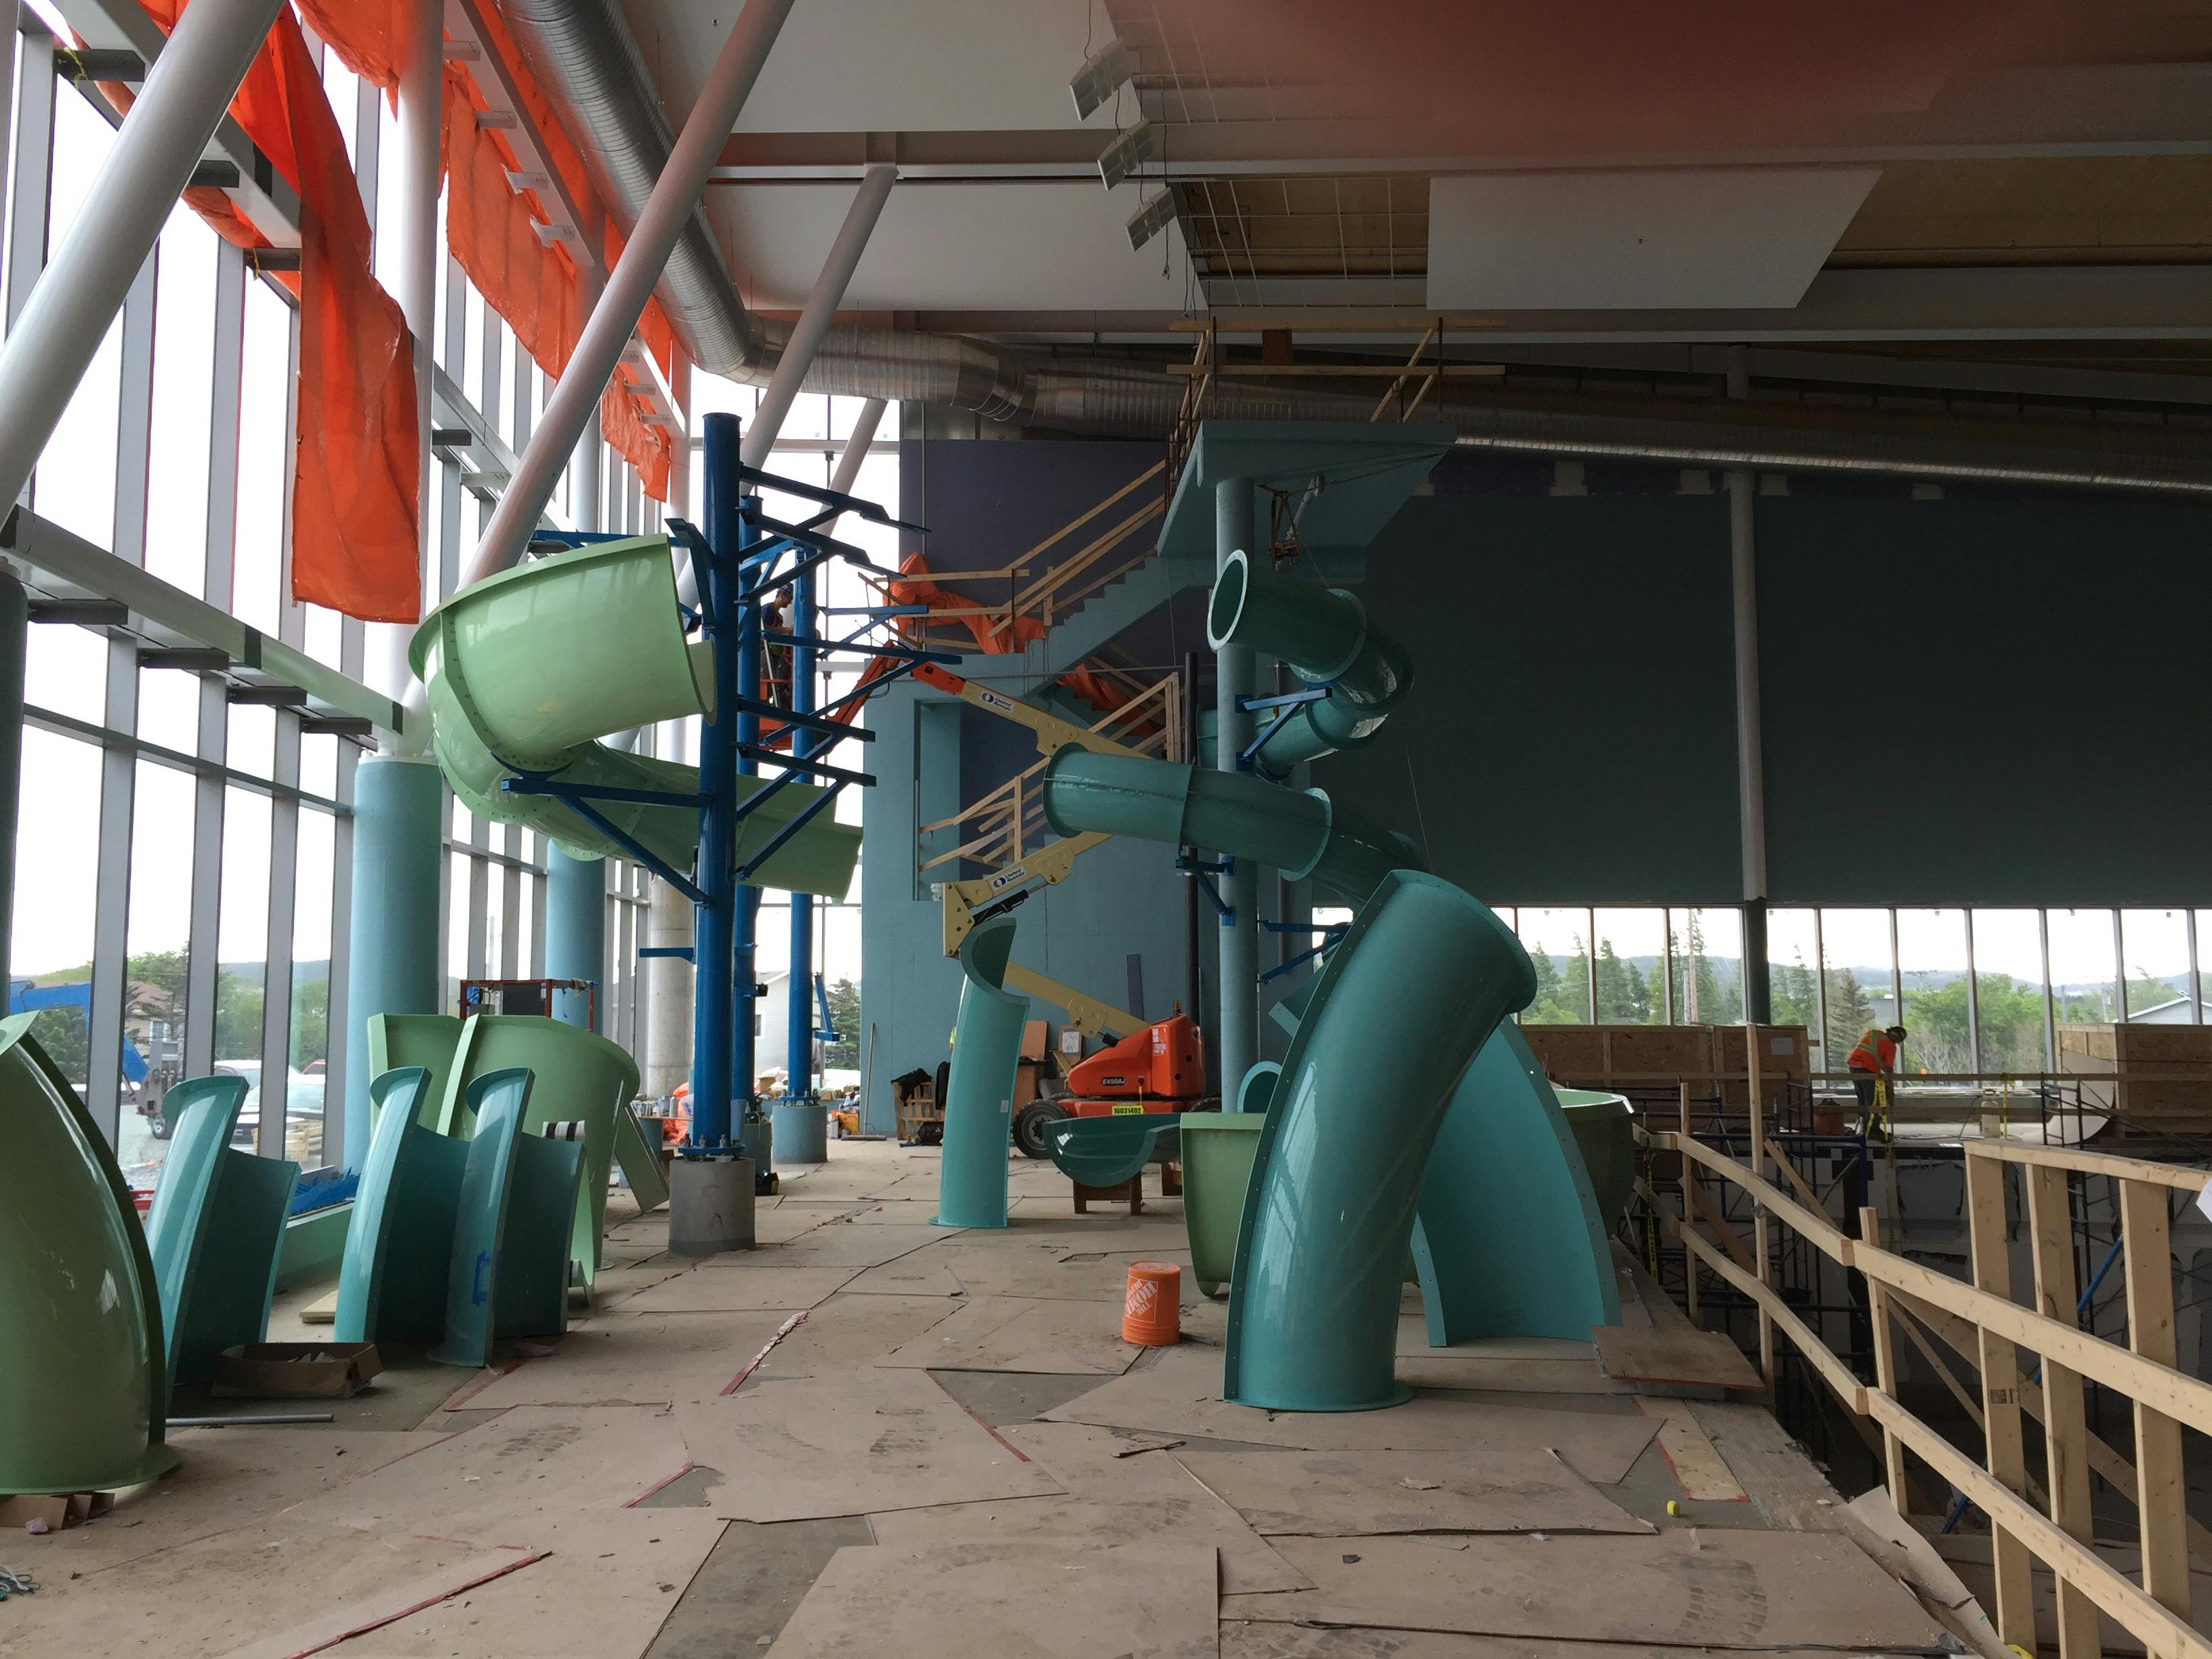 2 water slides being put together off the 8 metre tower June 22nd